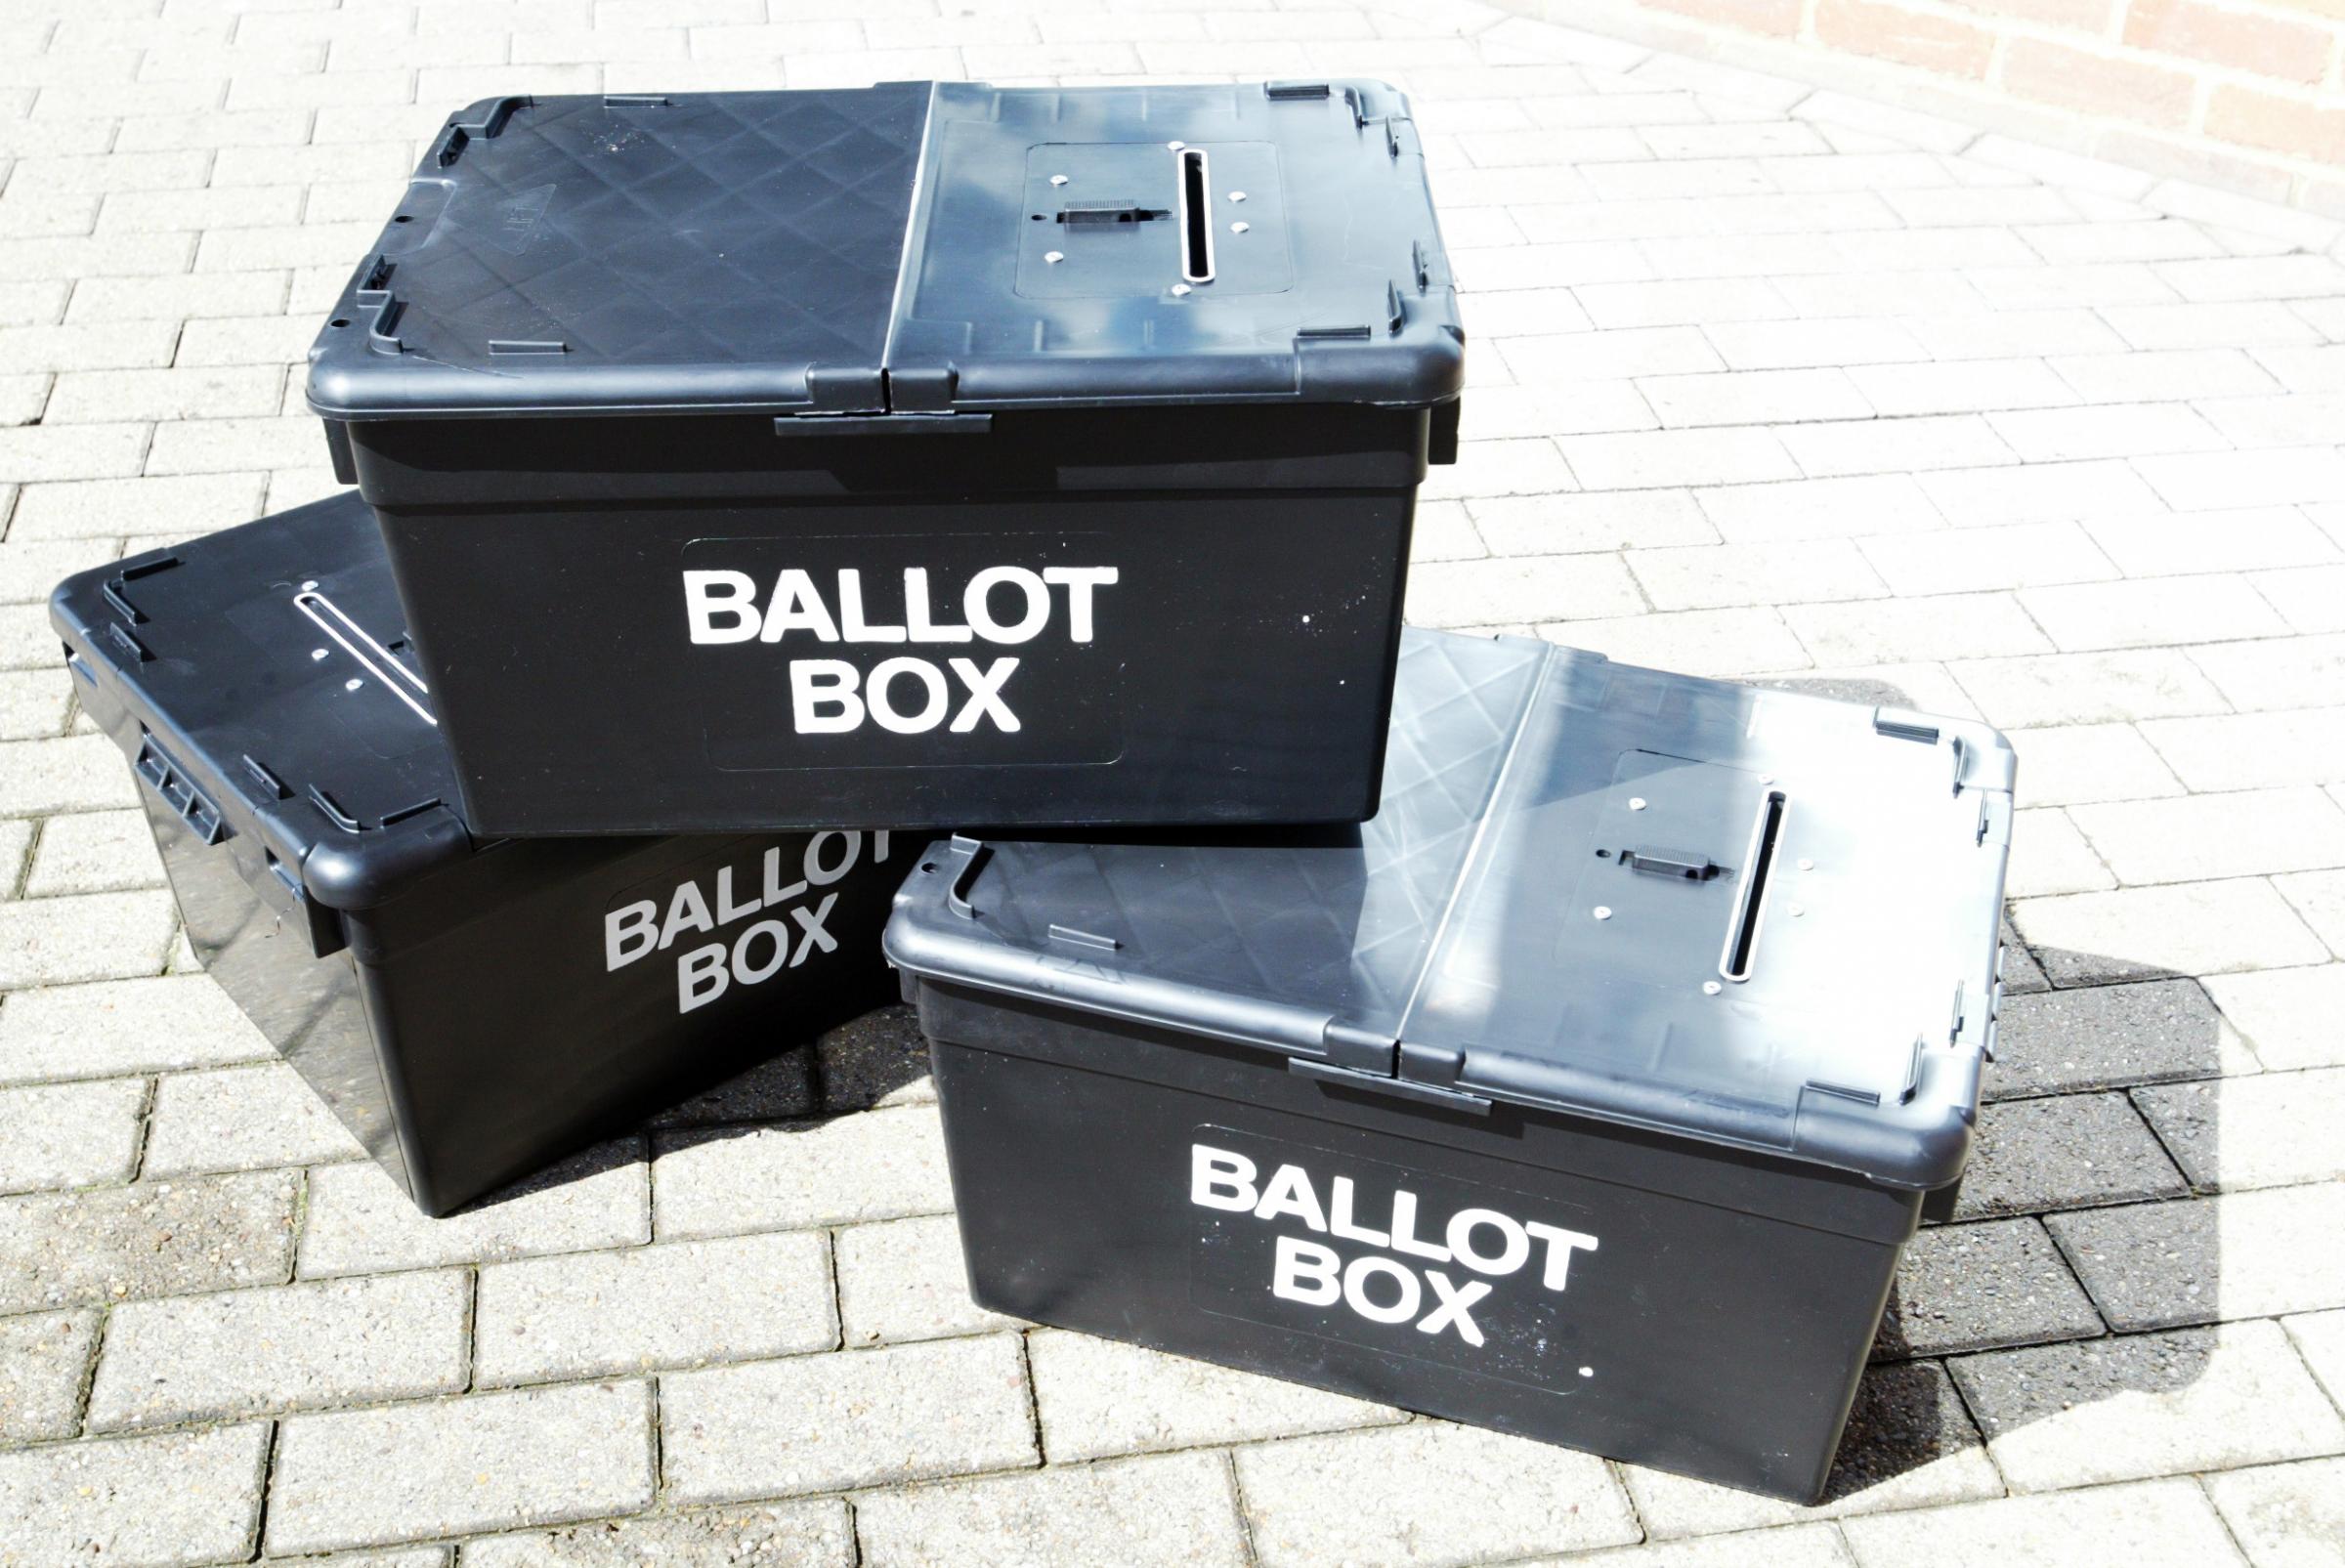 General Election: Waltham Forest candidates confirmed - East London and West Essex Guardian Series